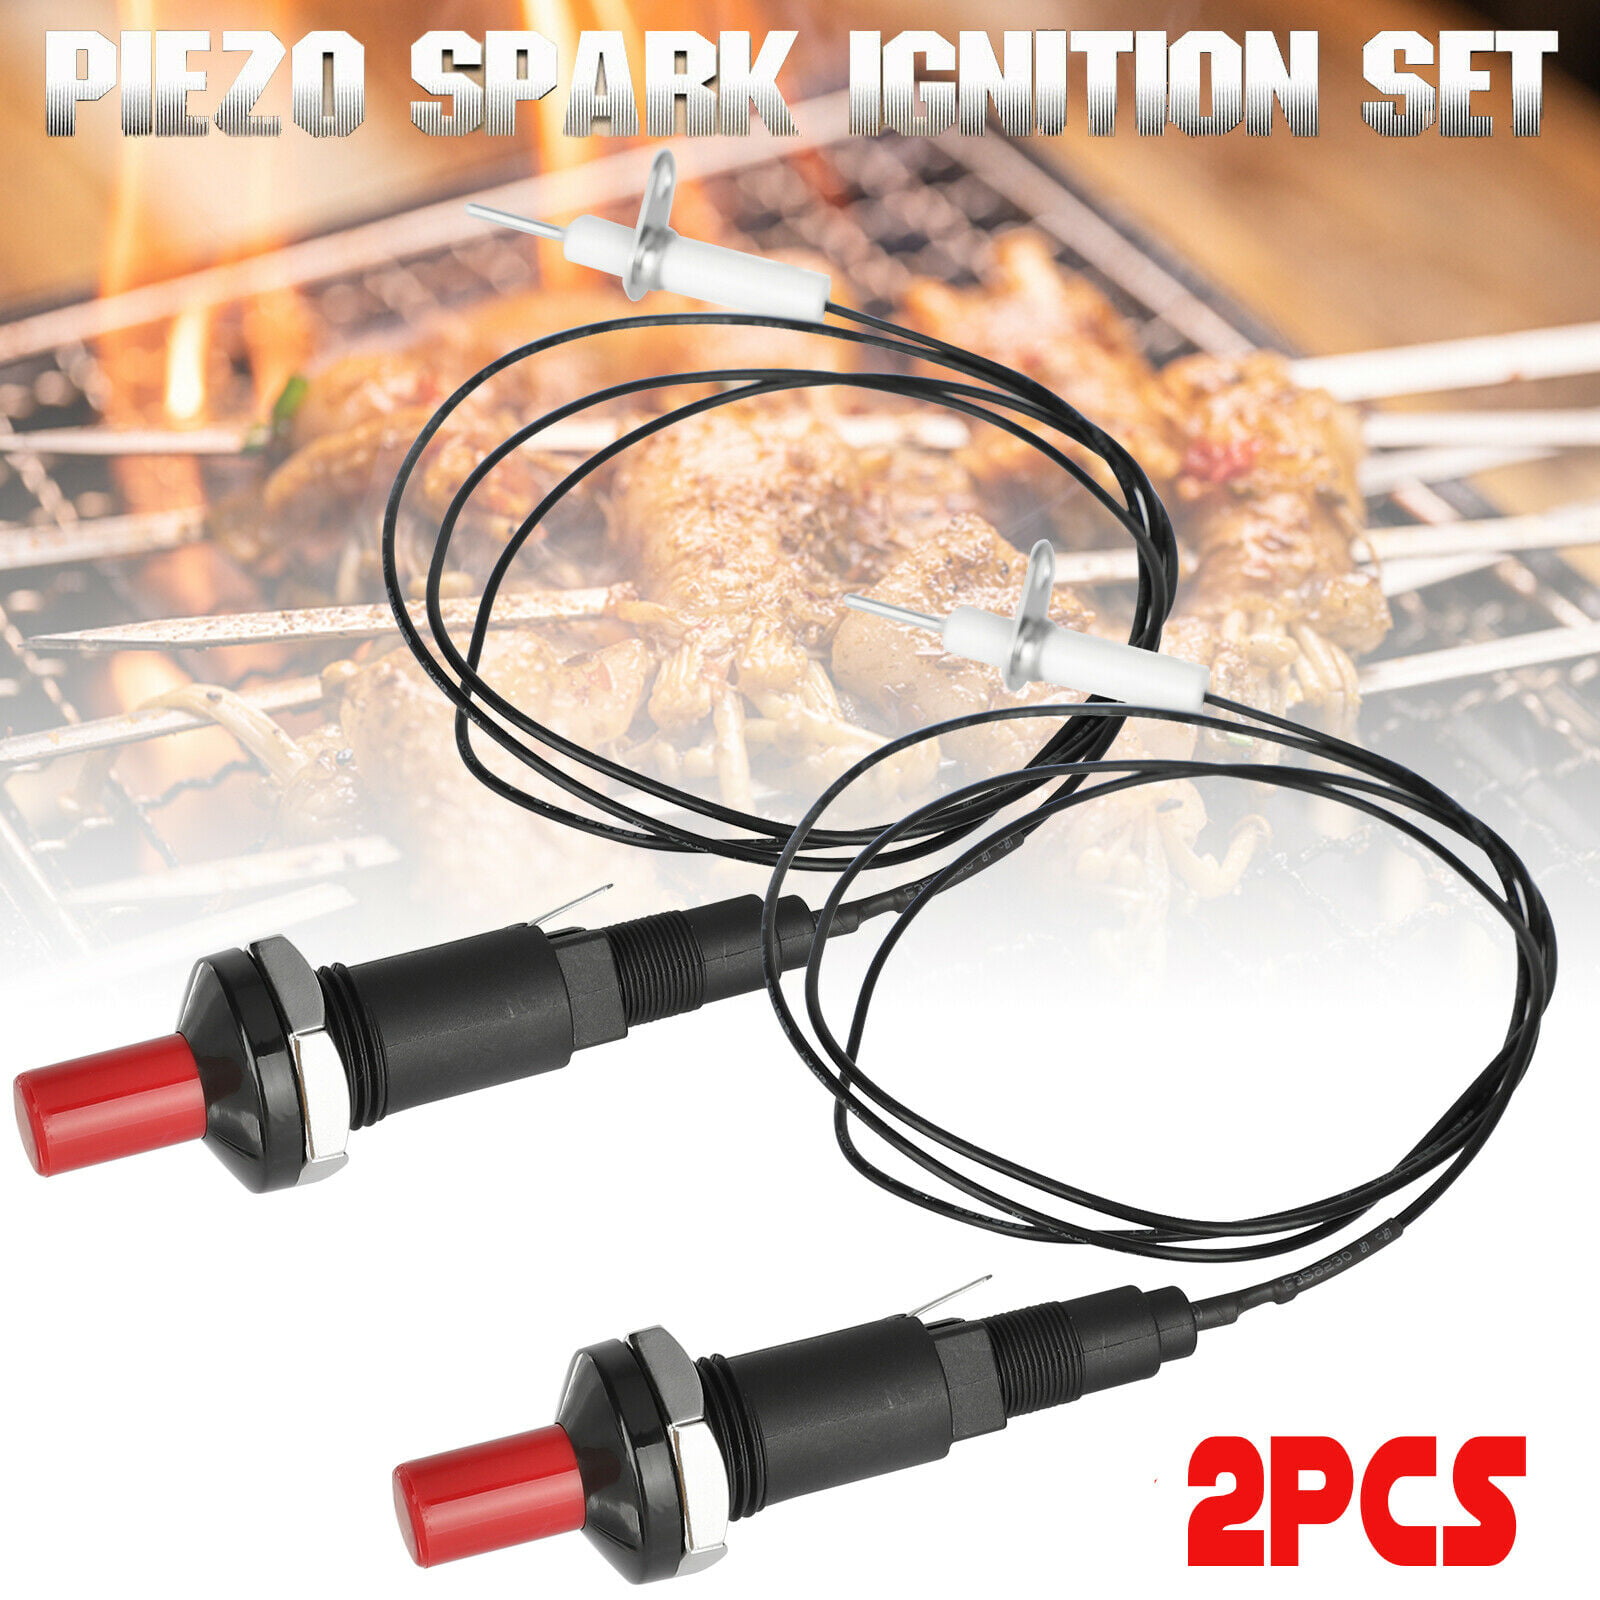 Universal Piezo Spark Ignition Push Button Igniter Fireplace Stove Gas Grill 